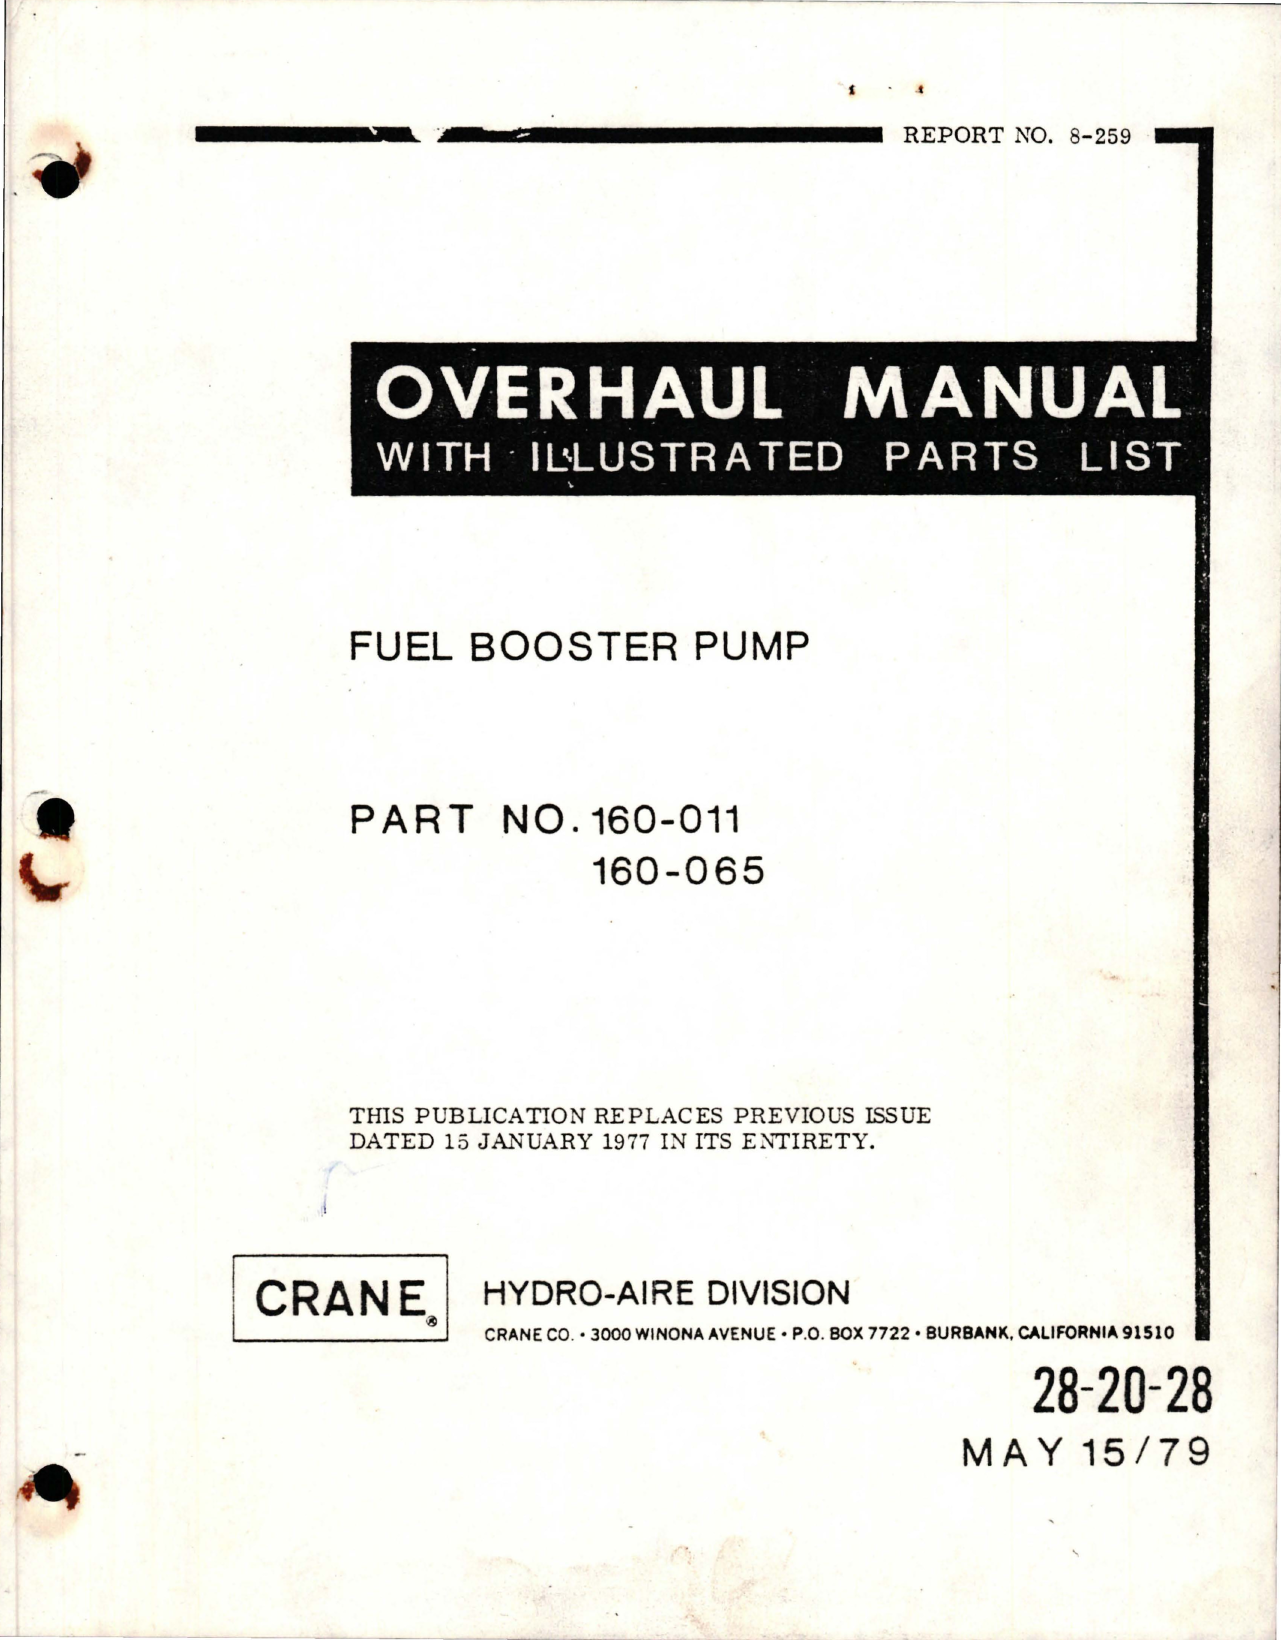 Sample page 1 from AirCorps Library document: Overhaul with Illustrated Parts List for Fuel Booster Pump - Part 160-011 and 160-065